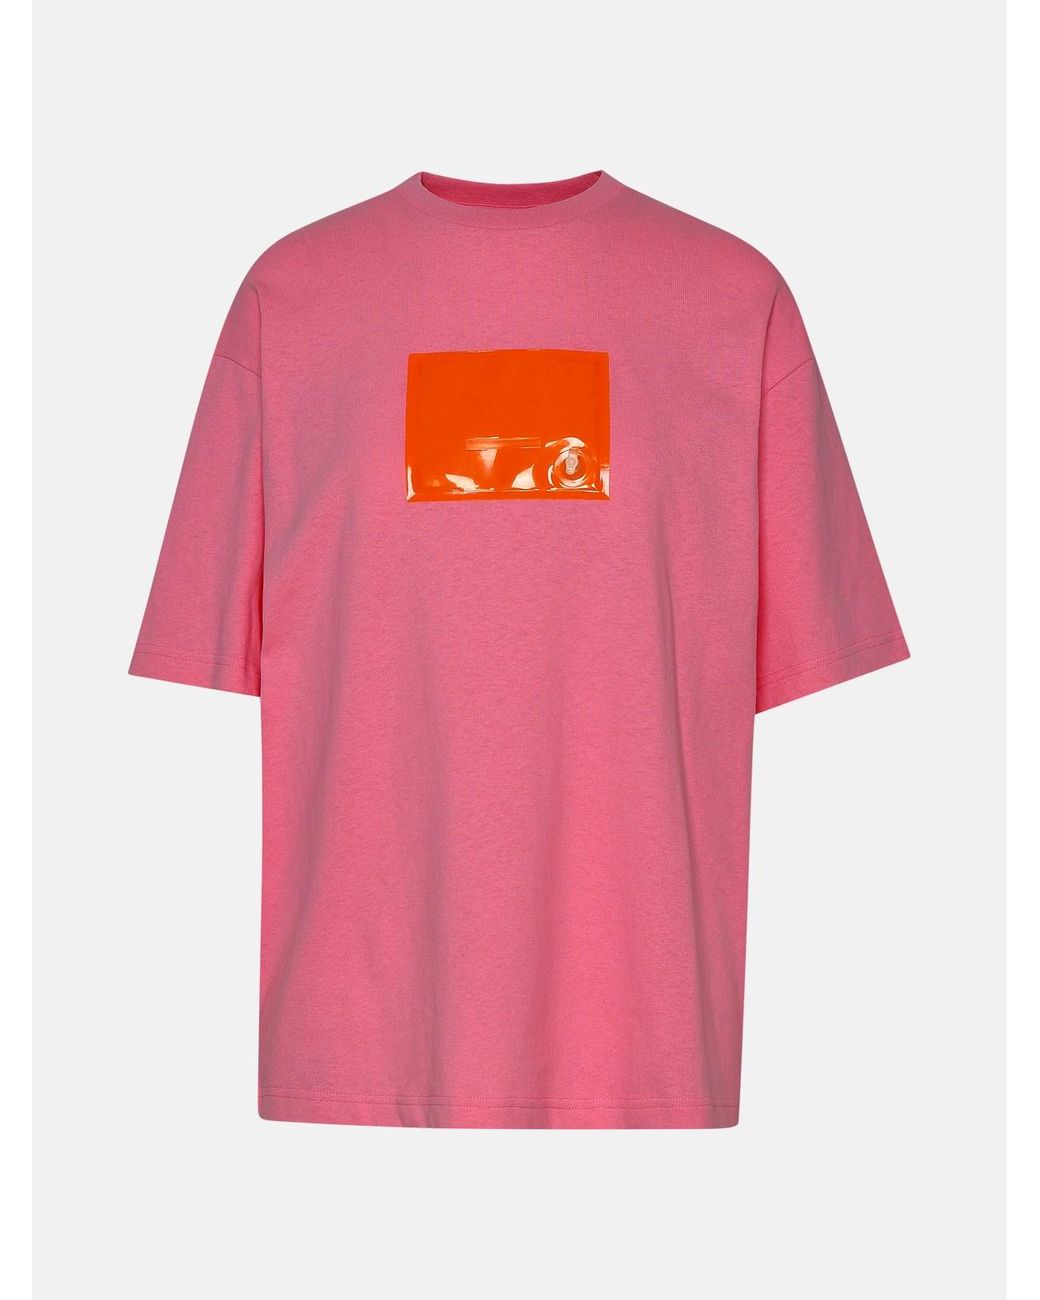 Acne Studios Rose Cotton T-shirt in Pink | Lyst